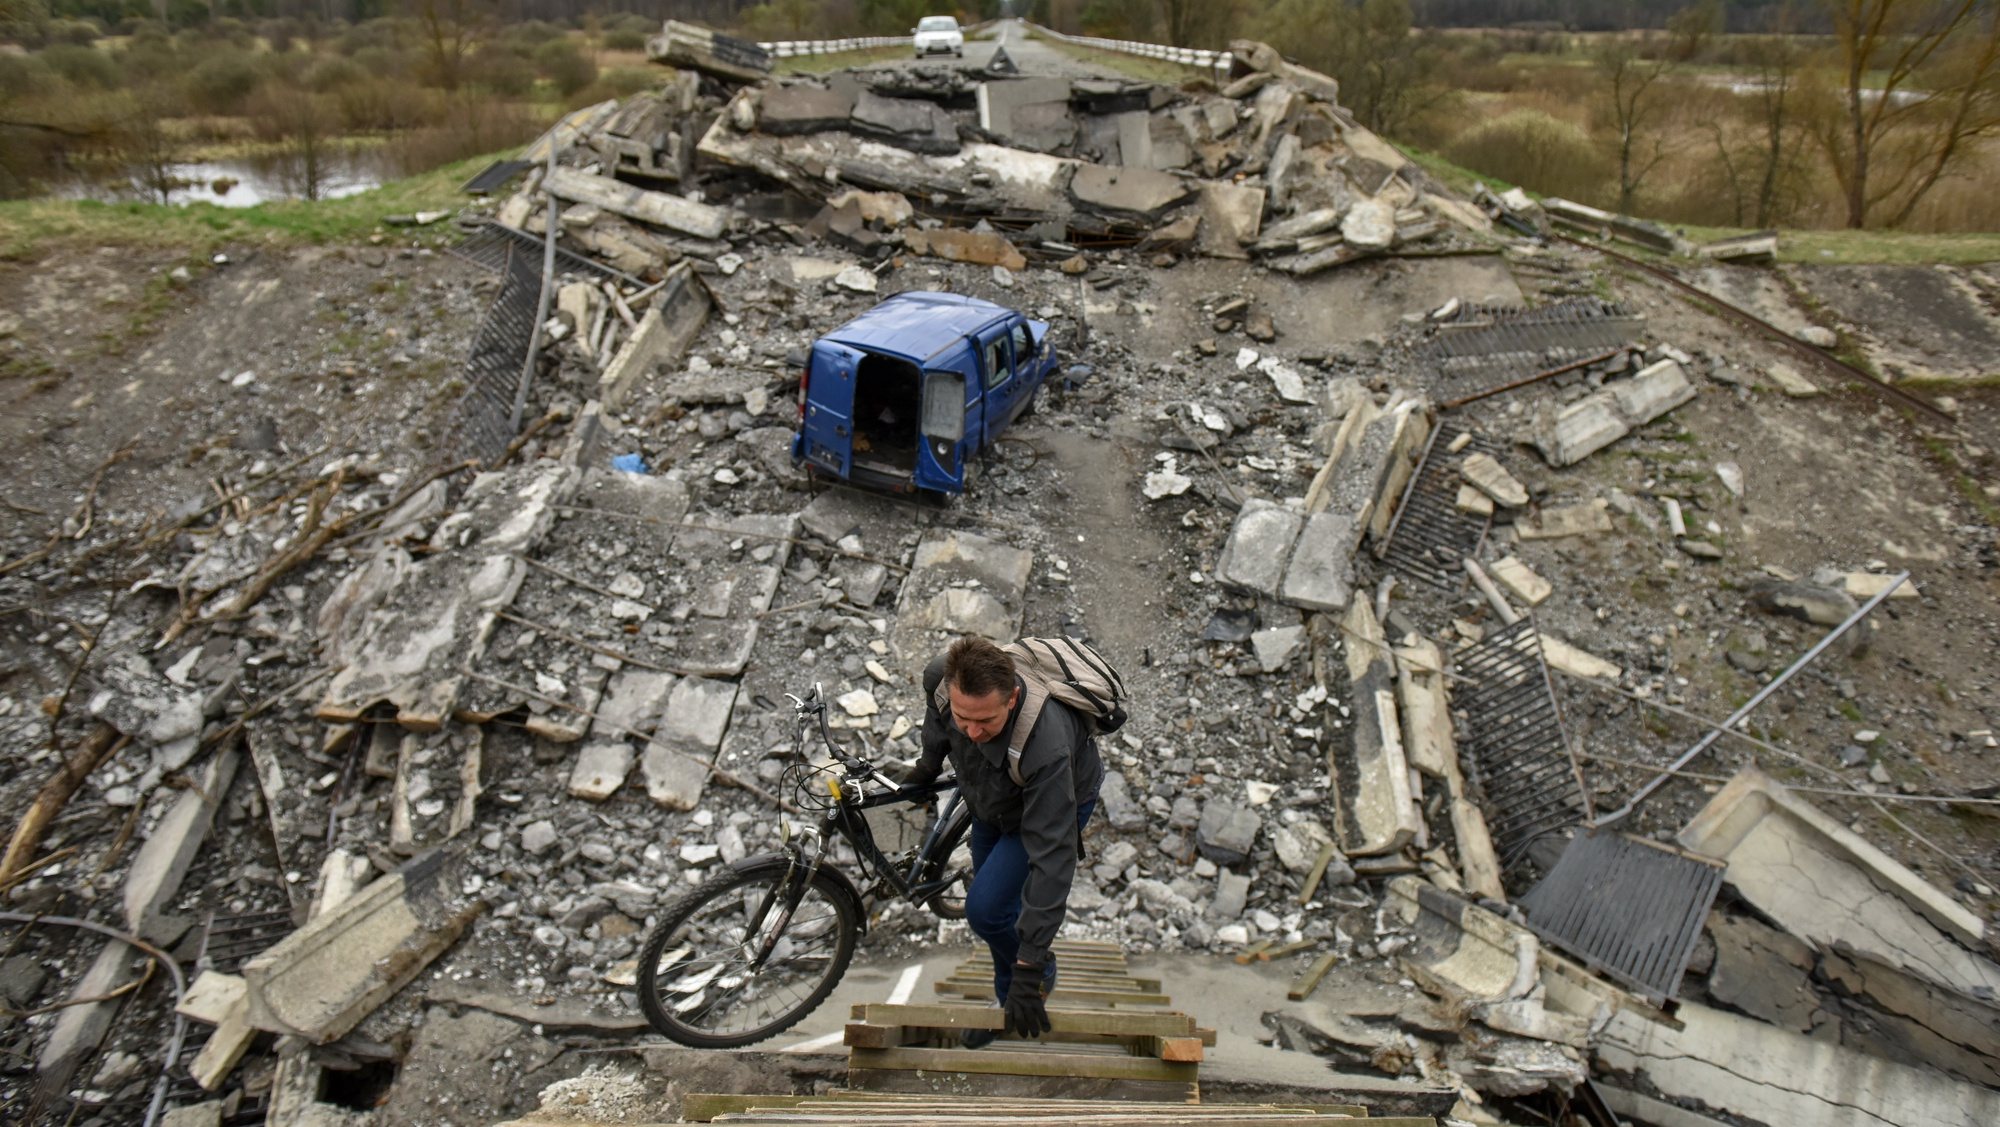 epa09897416 A man carries a bicycle over a destroyed bridge in Kyiv (Kiev) area, Ukraine, 19 April 2022. On 24 February Russian troops had entered Ukrainian territory resulting in fighting and destruction in the country, a huge flow of refugees, and multiple sanctions against Russia.  EPA/OLEG PETRASYUK